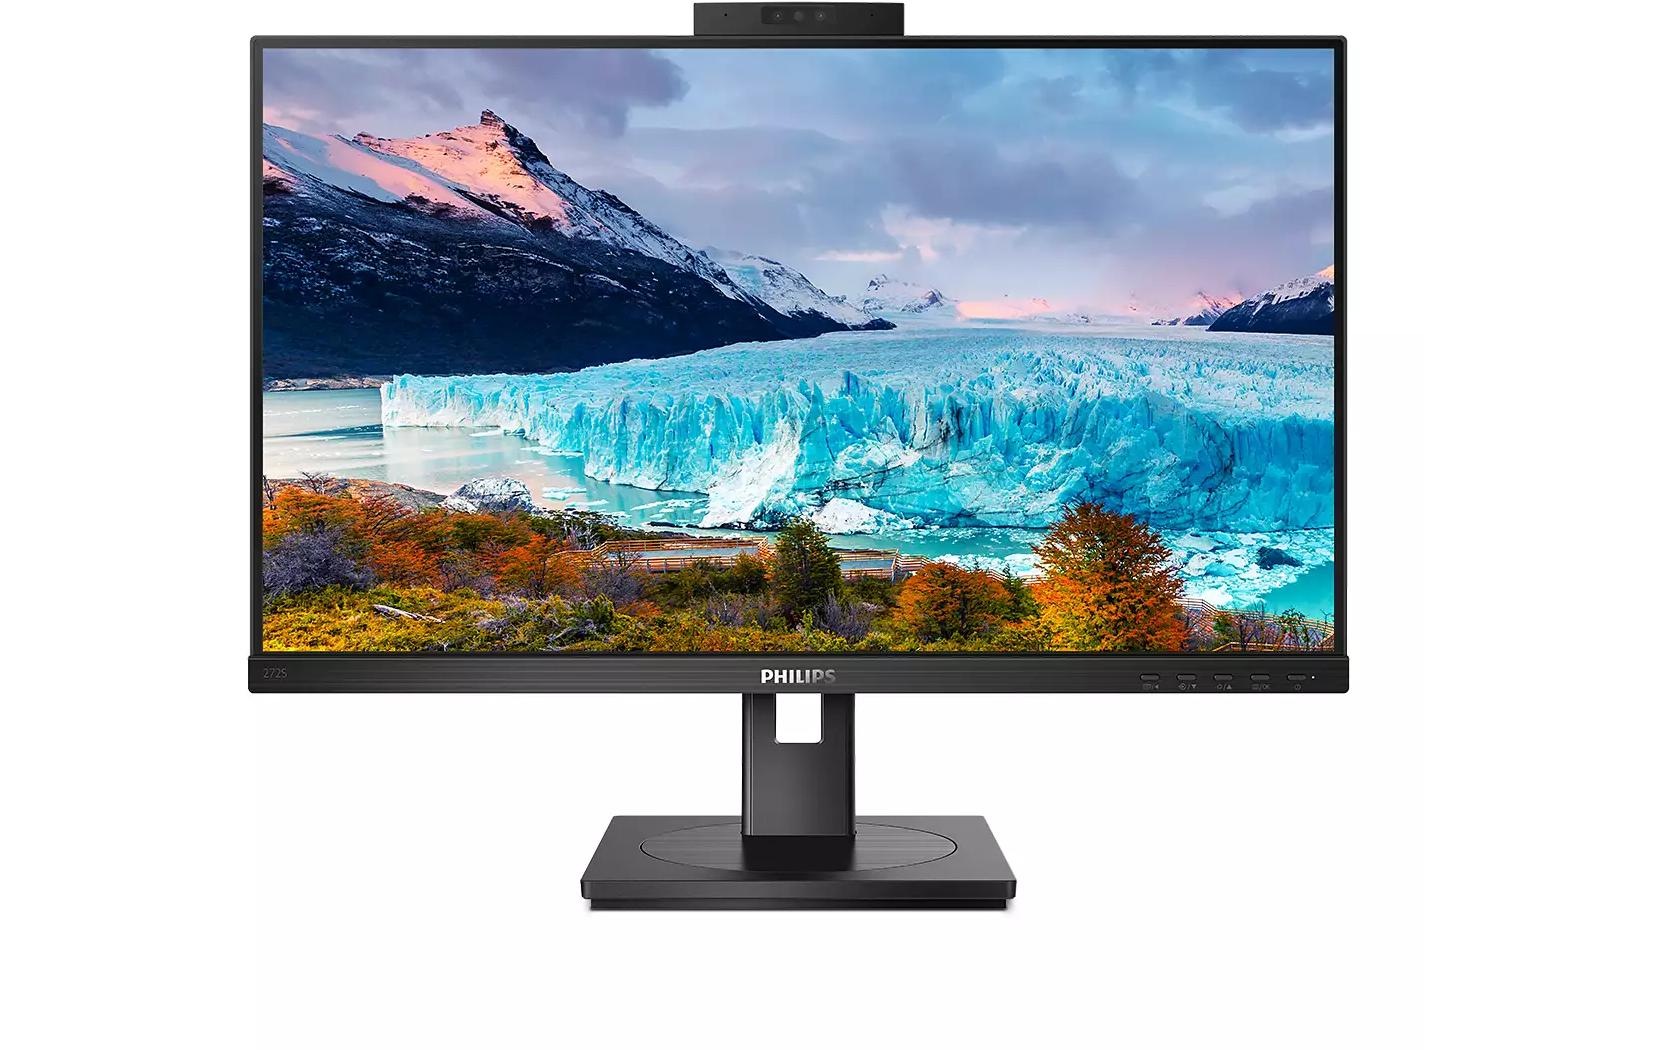 LCD-Monitor »Philips 272S1MH/00«, 68,31 cm/27 Zoll, 1920 x 1080 px, Full HD, 4 ms...